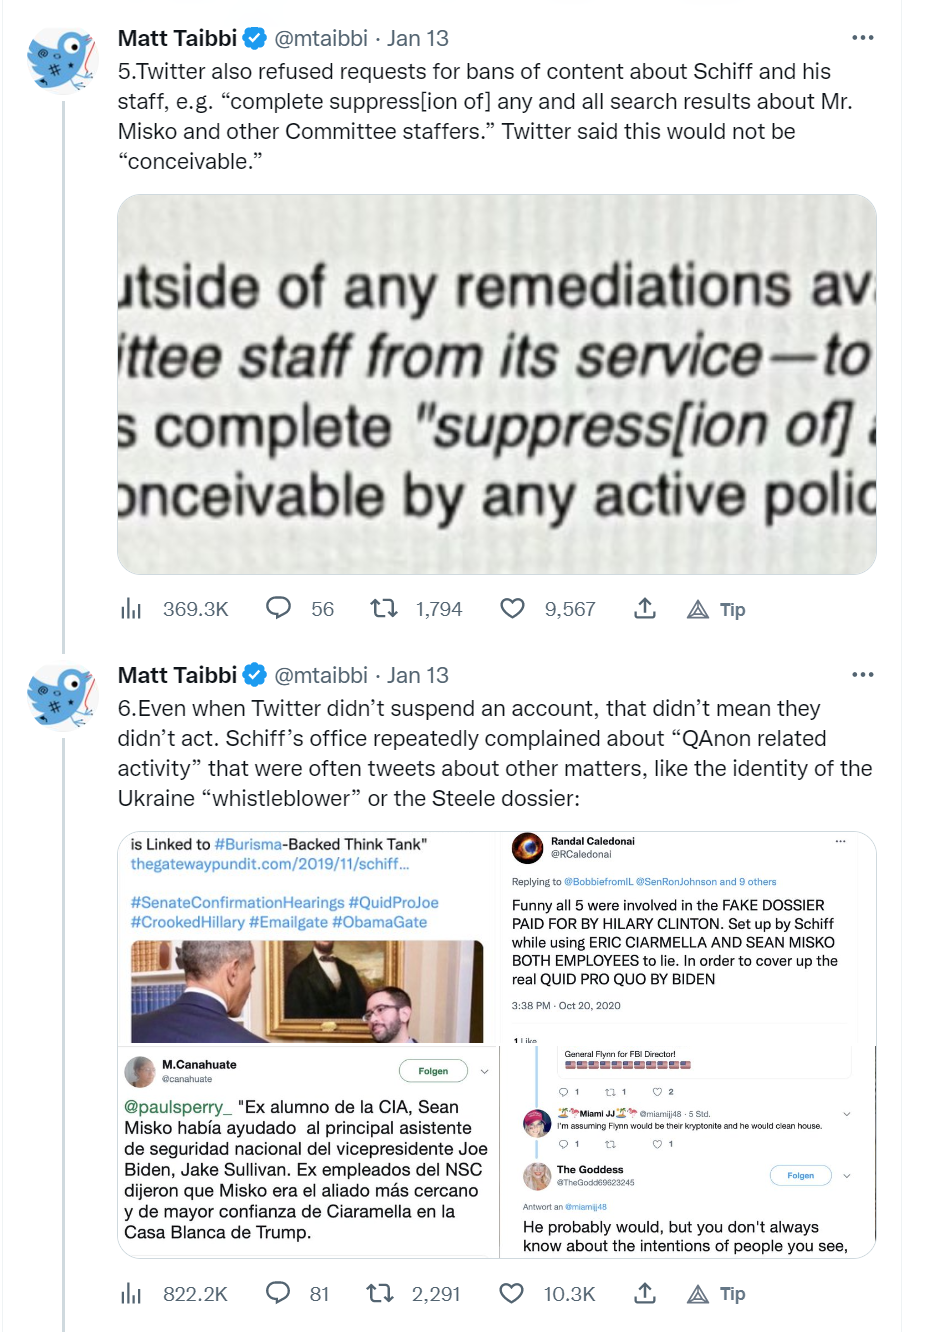 TWITTER FILES Pt. 13 - Supplemental More Adam Schiff Ban Requests and Deamplification